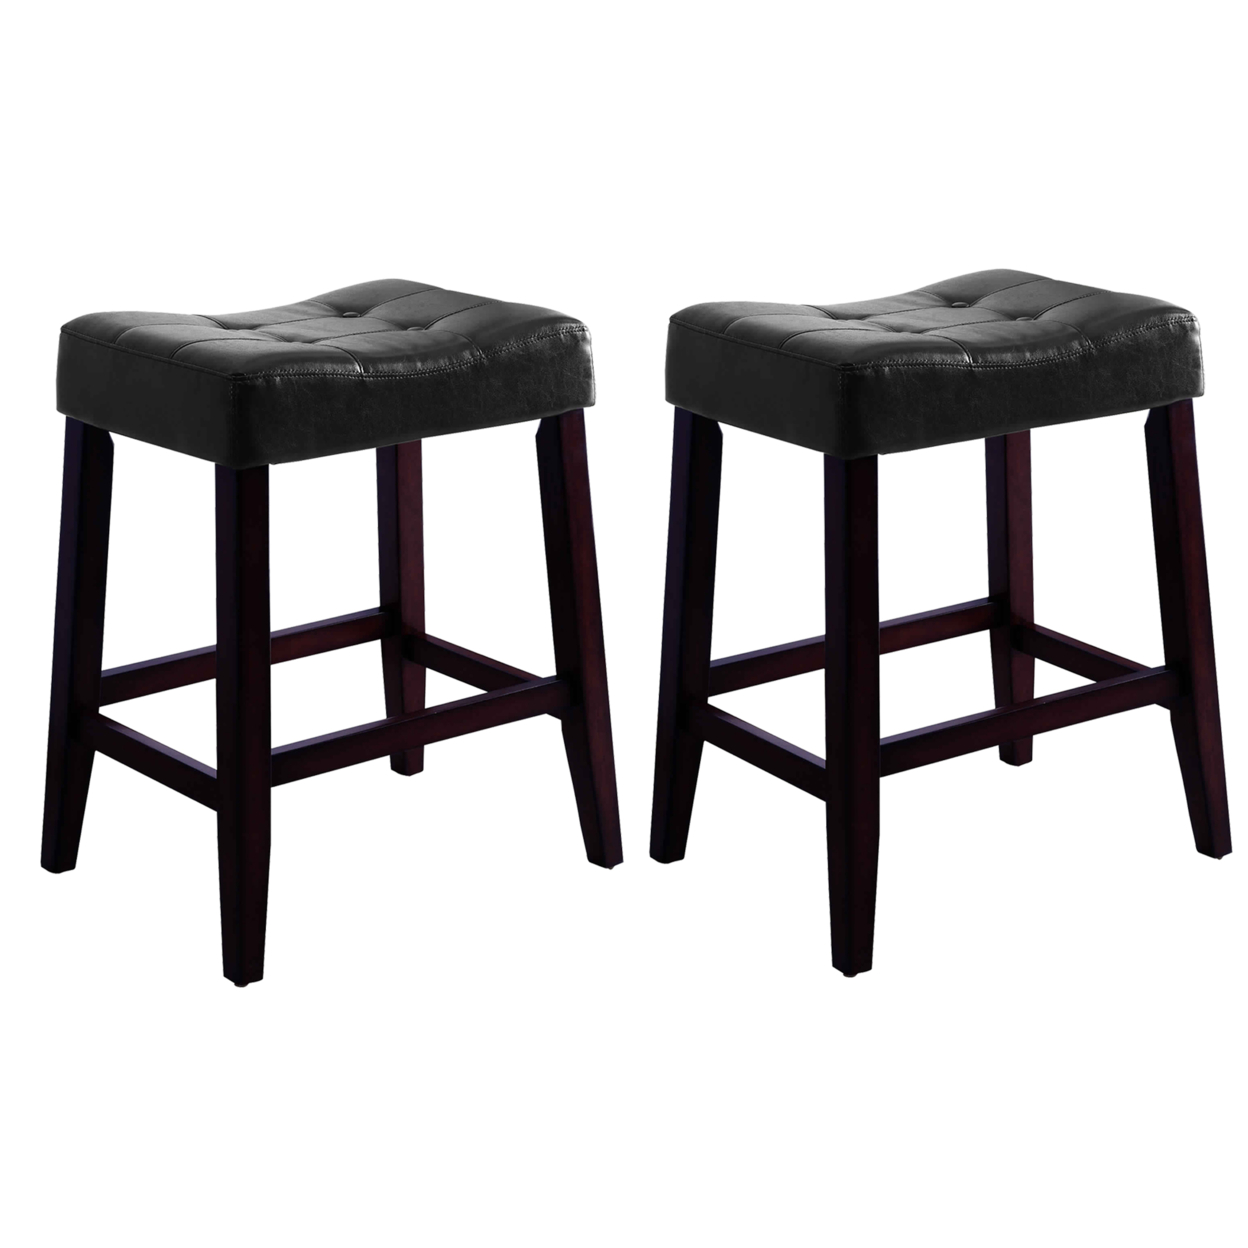 Wooden Stools With Saddle Seat And Button Tufts, Set Of 2, Black And Brown- Saltoro Sherpi